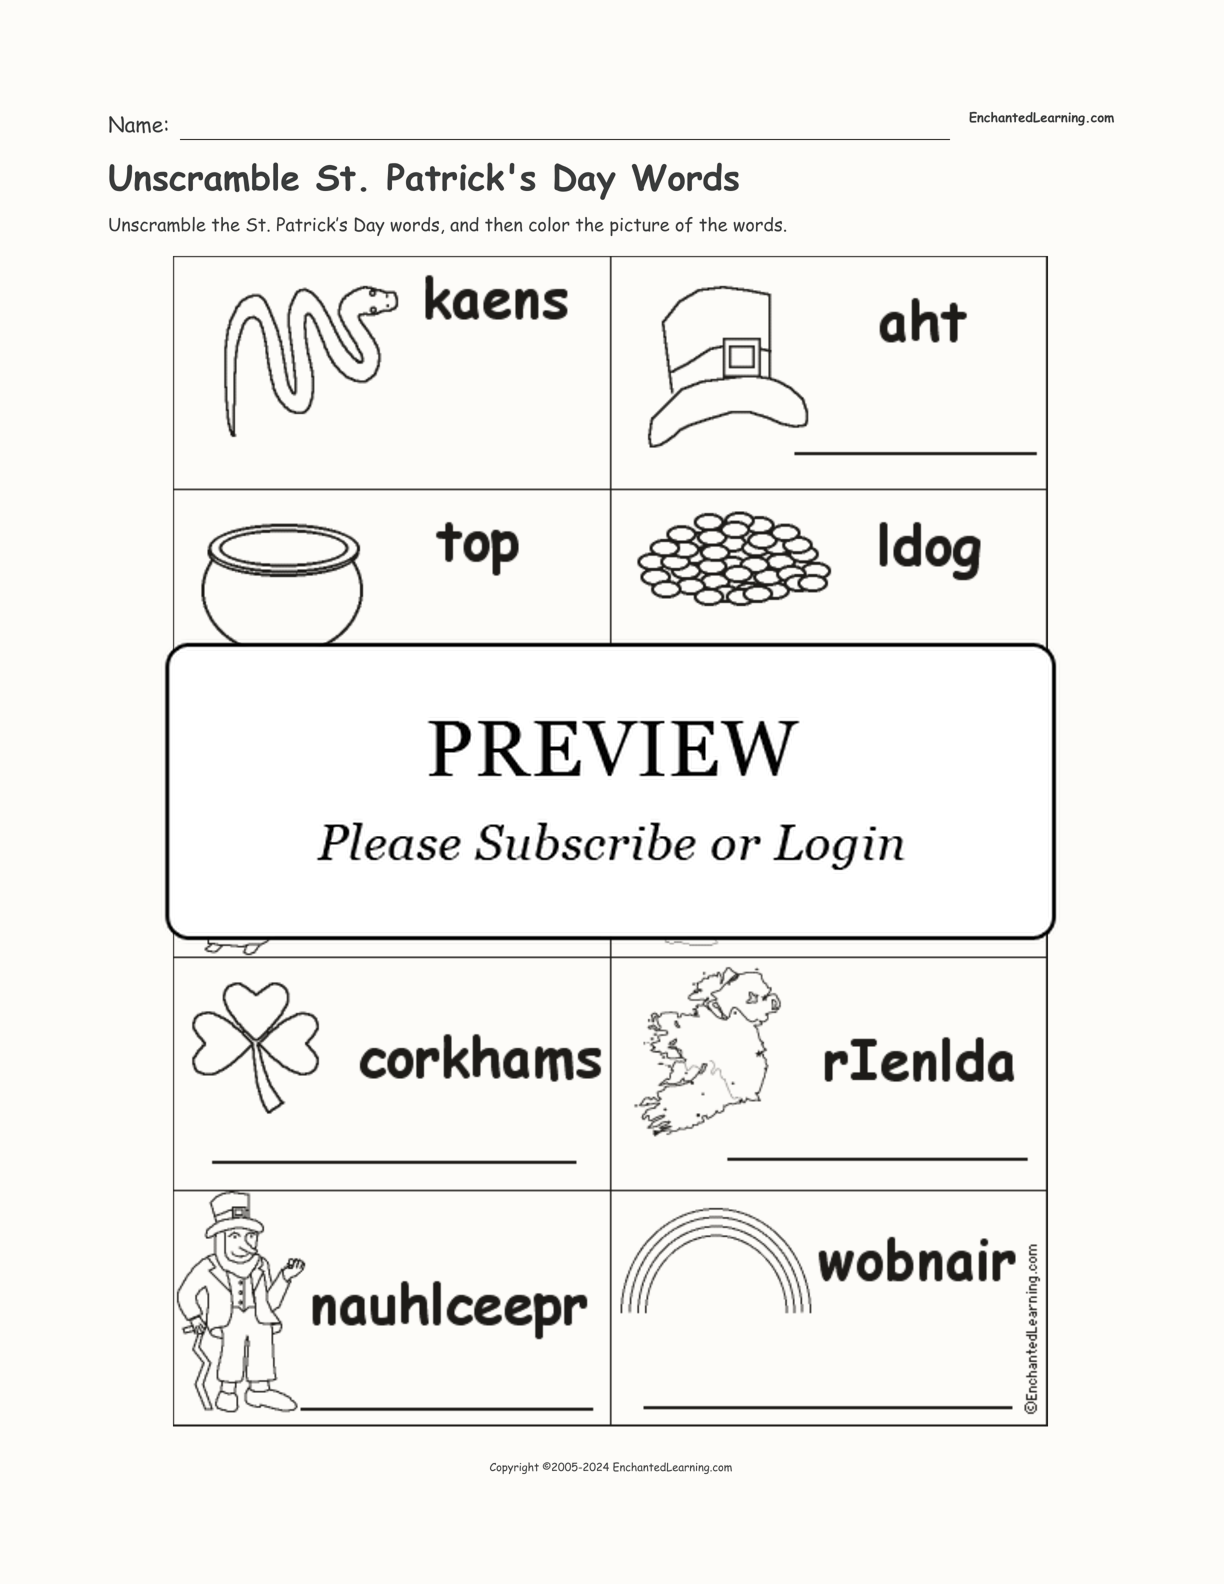 Unscramble St. Patrick's Day Words interactive worksheet page 1